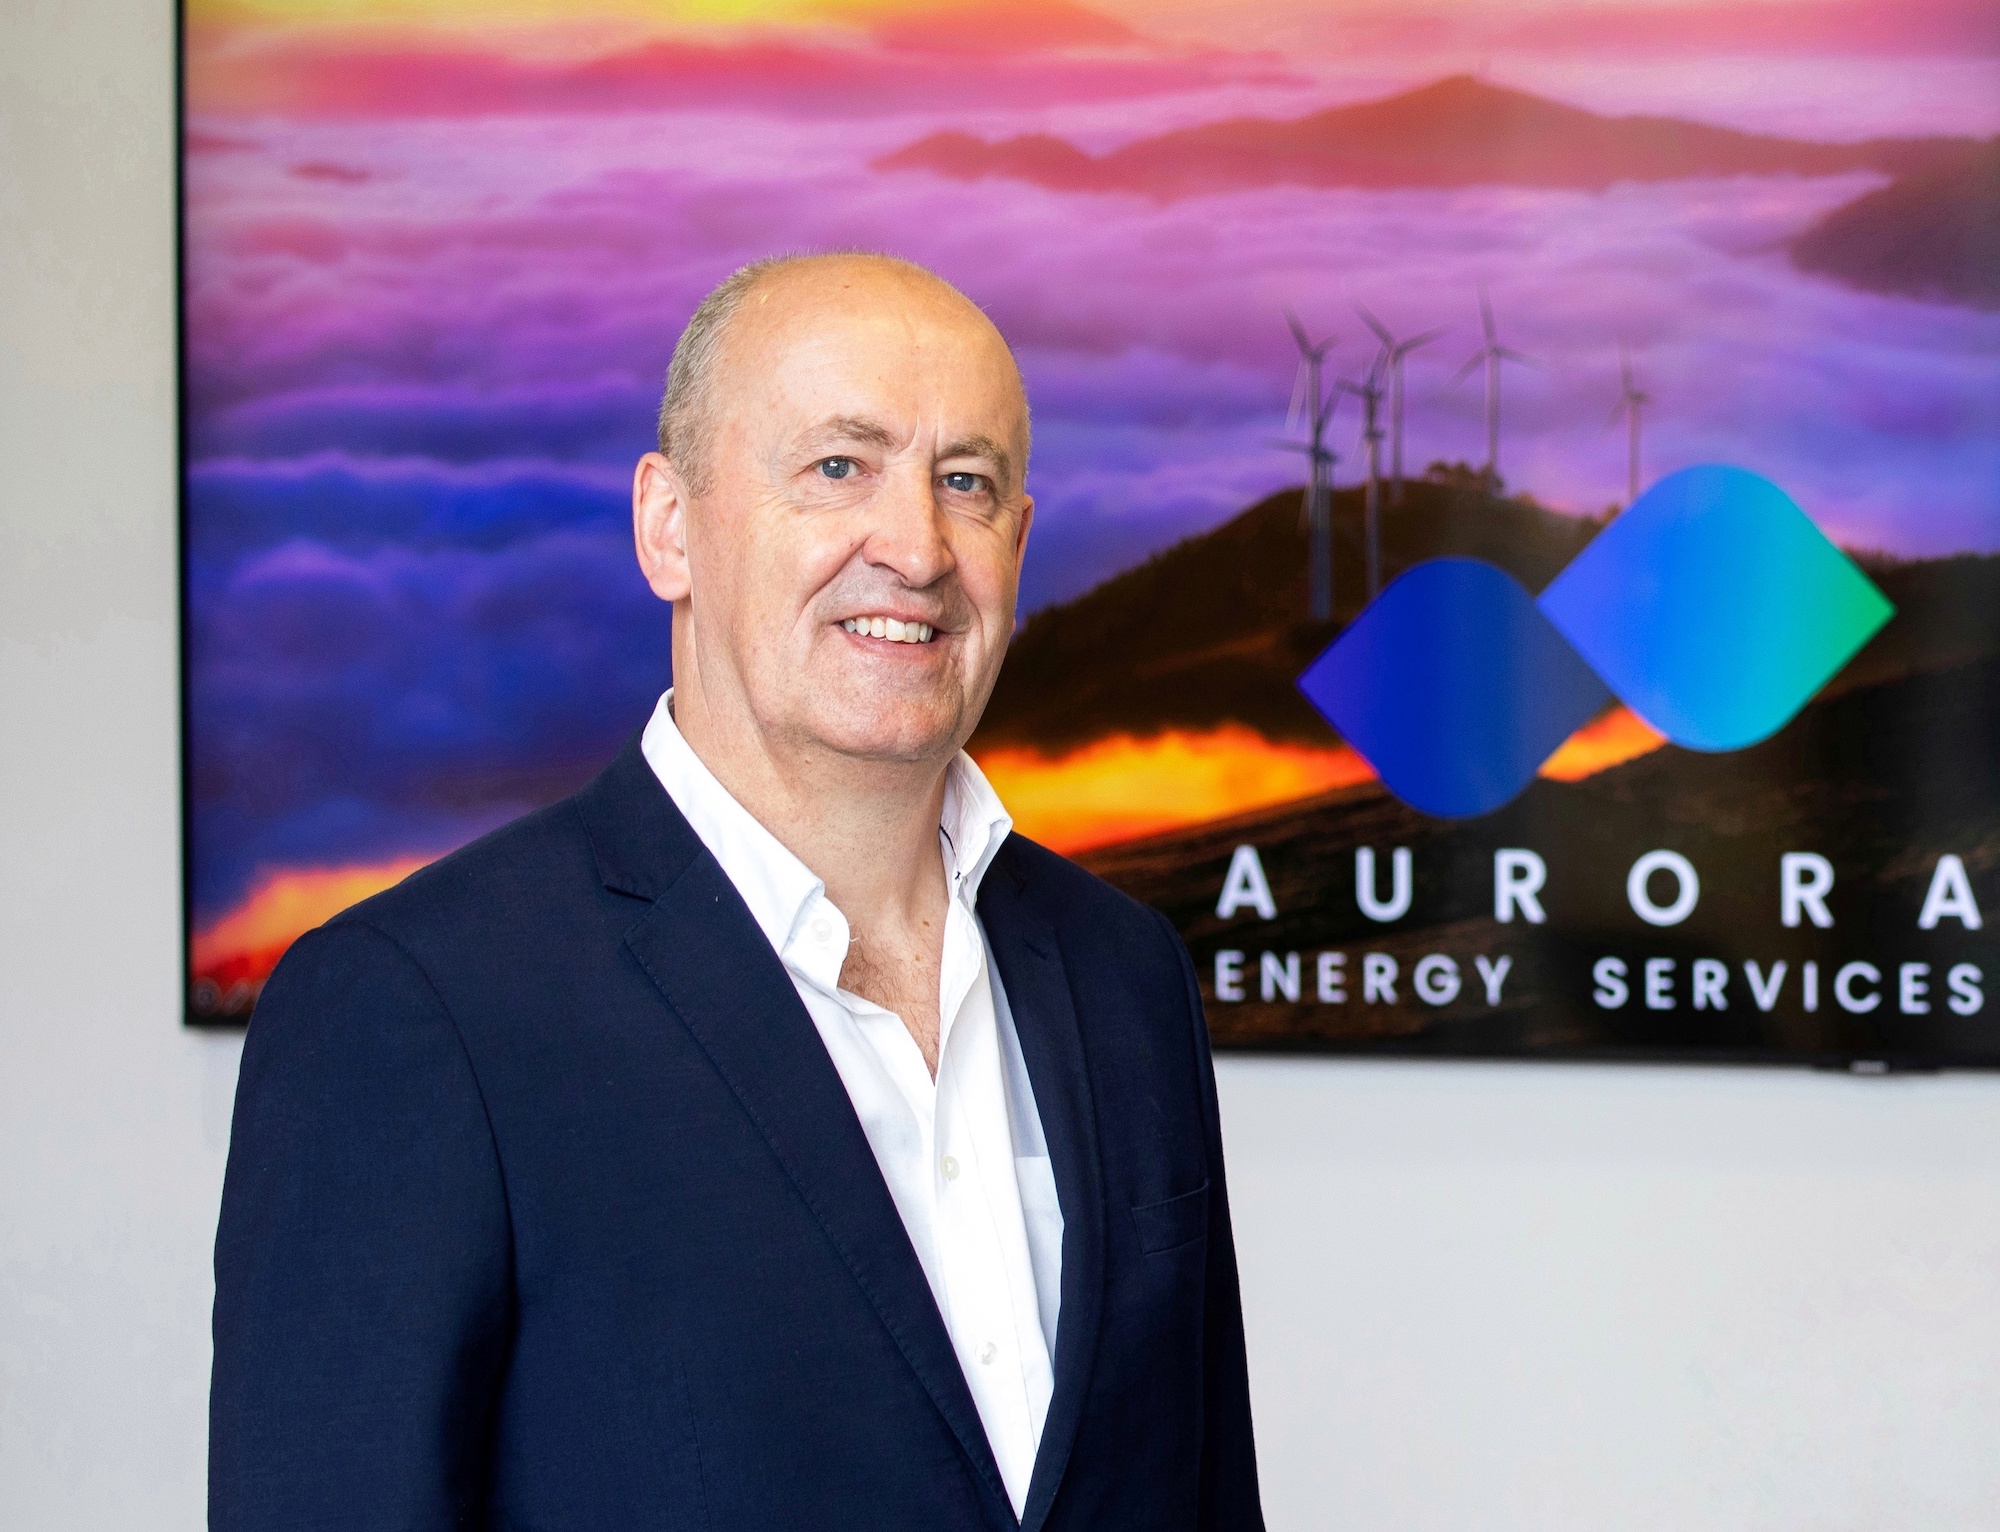 Aurora boost global wind energy presence with Cotech acquisition